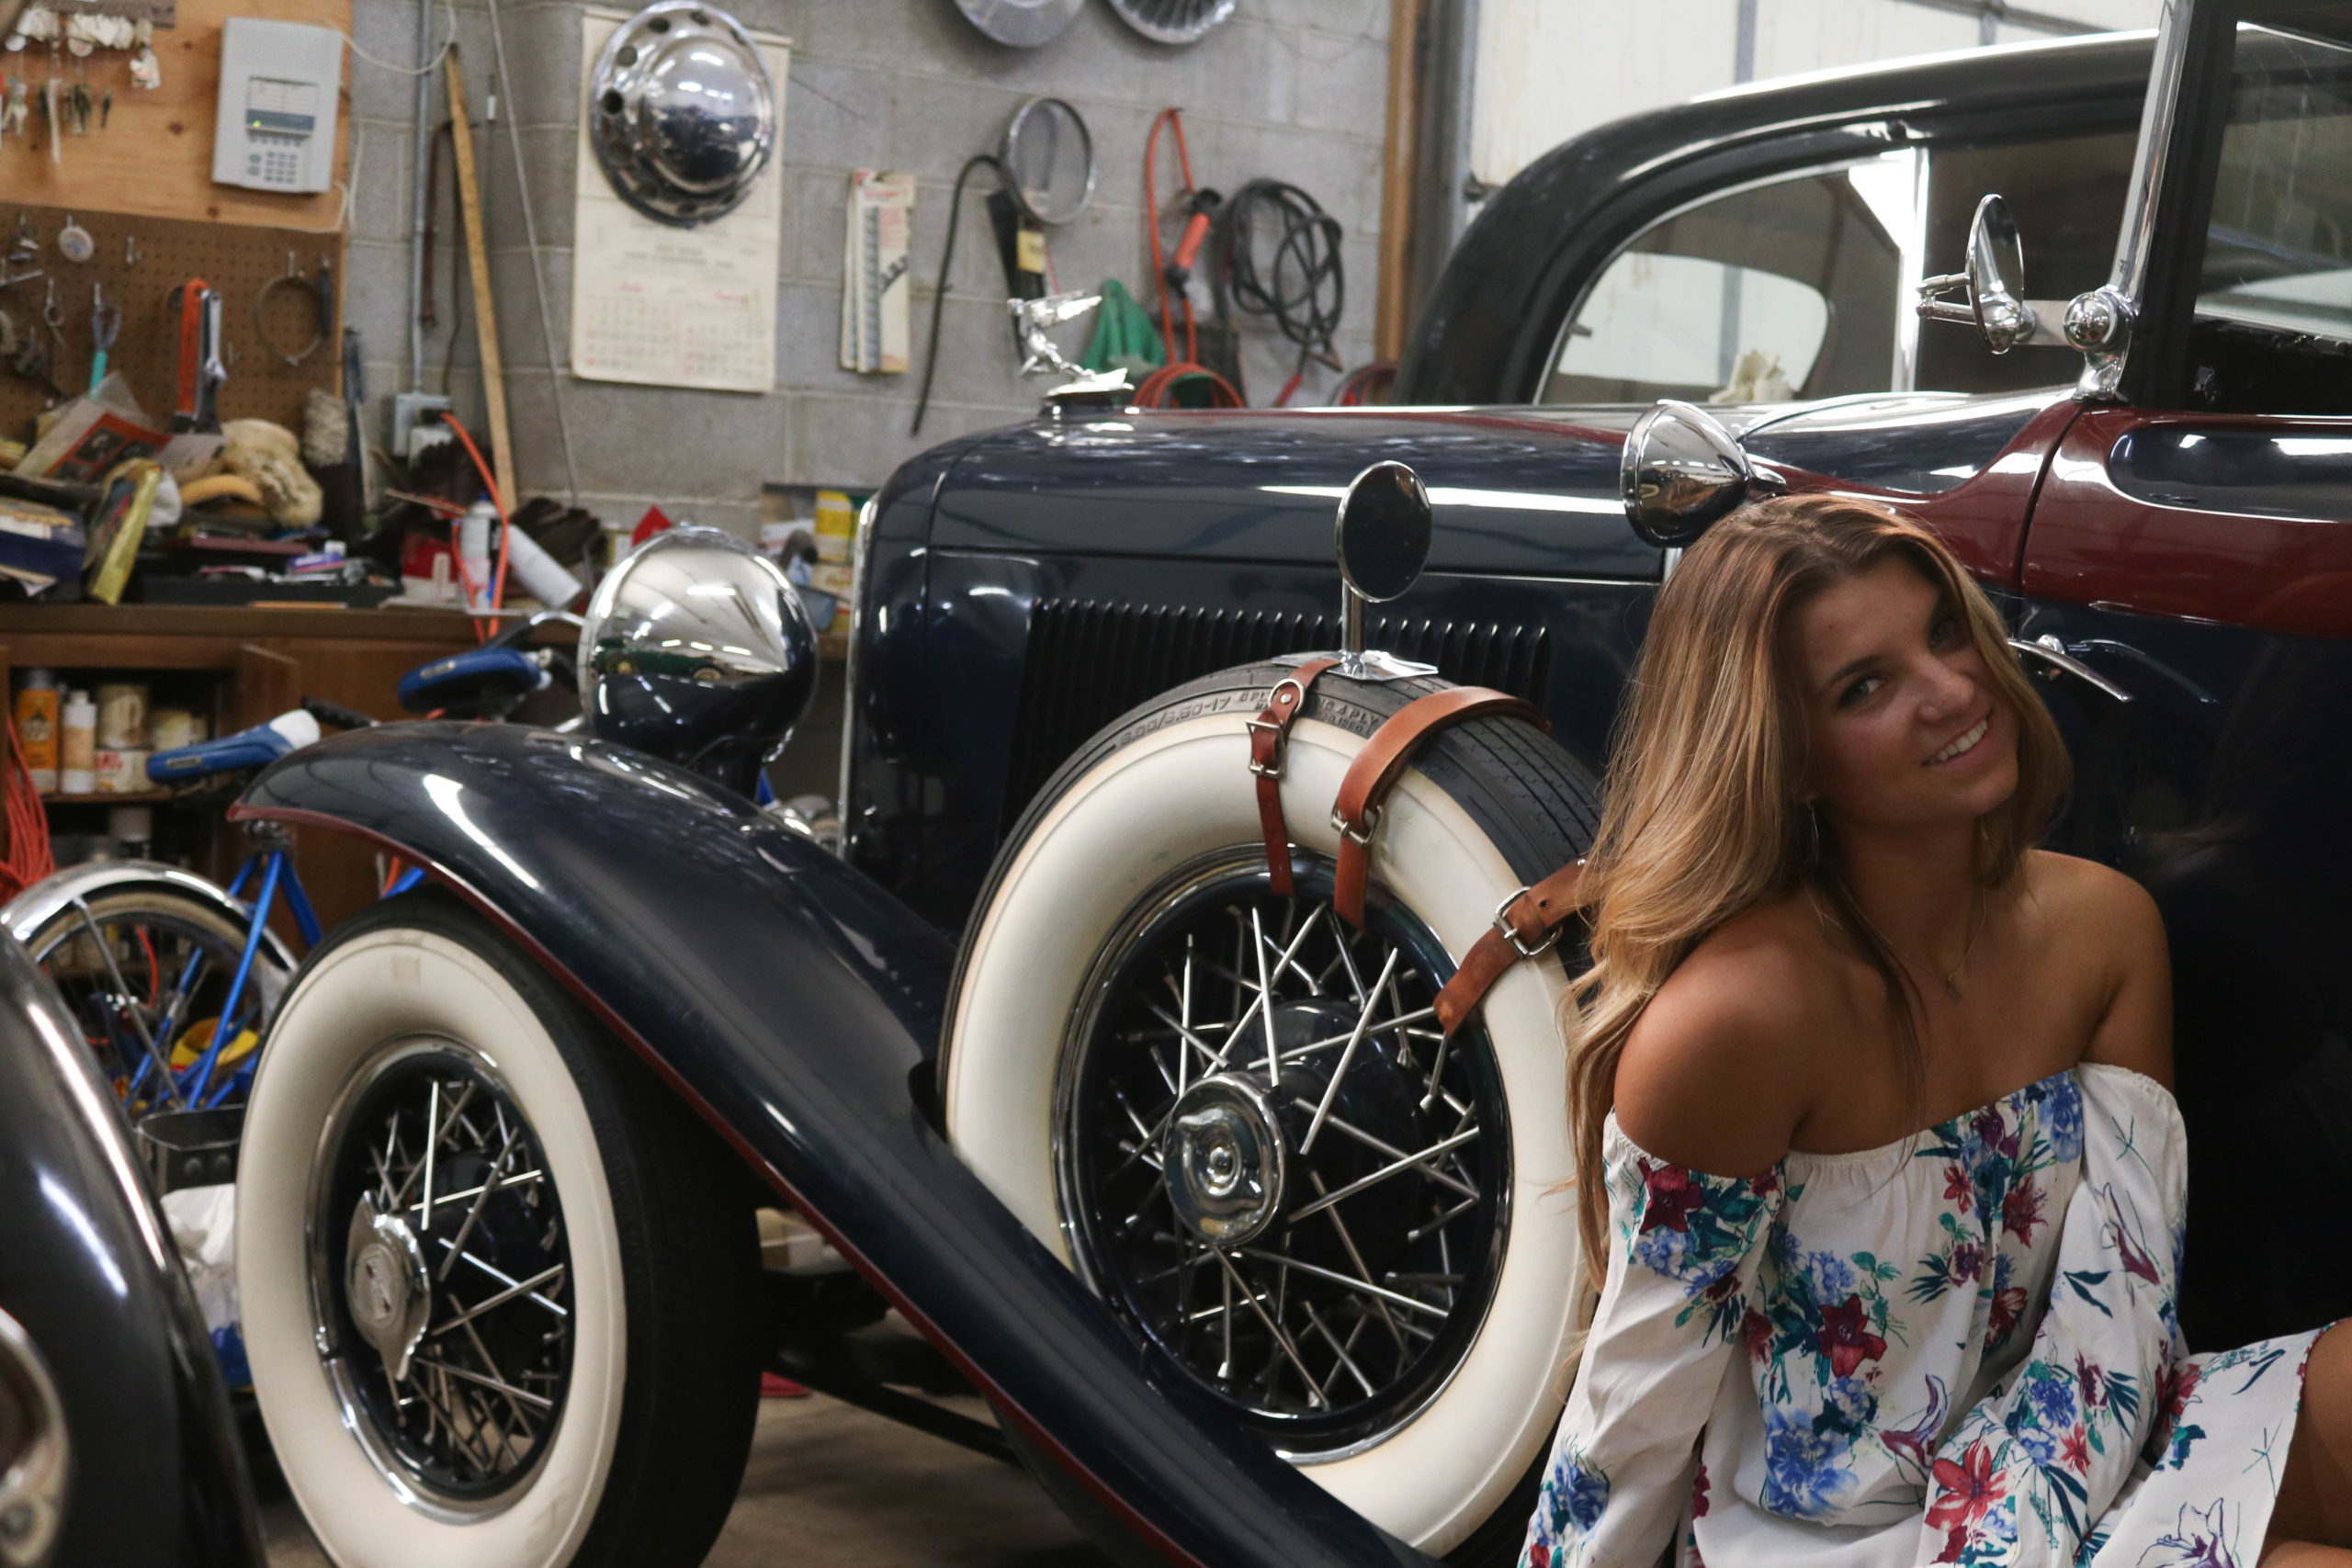 Kendeyl & Classic Car Photoshoot | Captured By Lexi In Utah